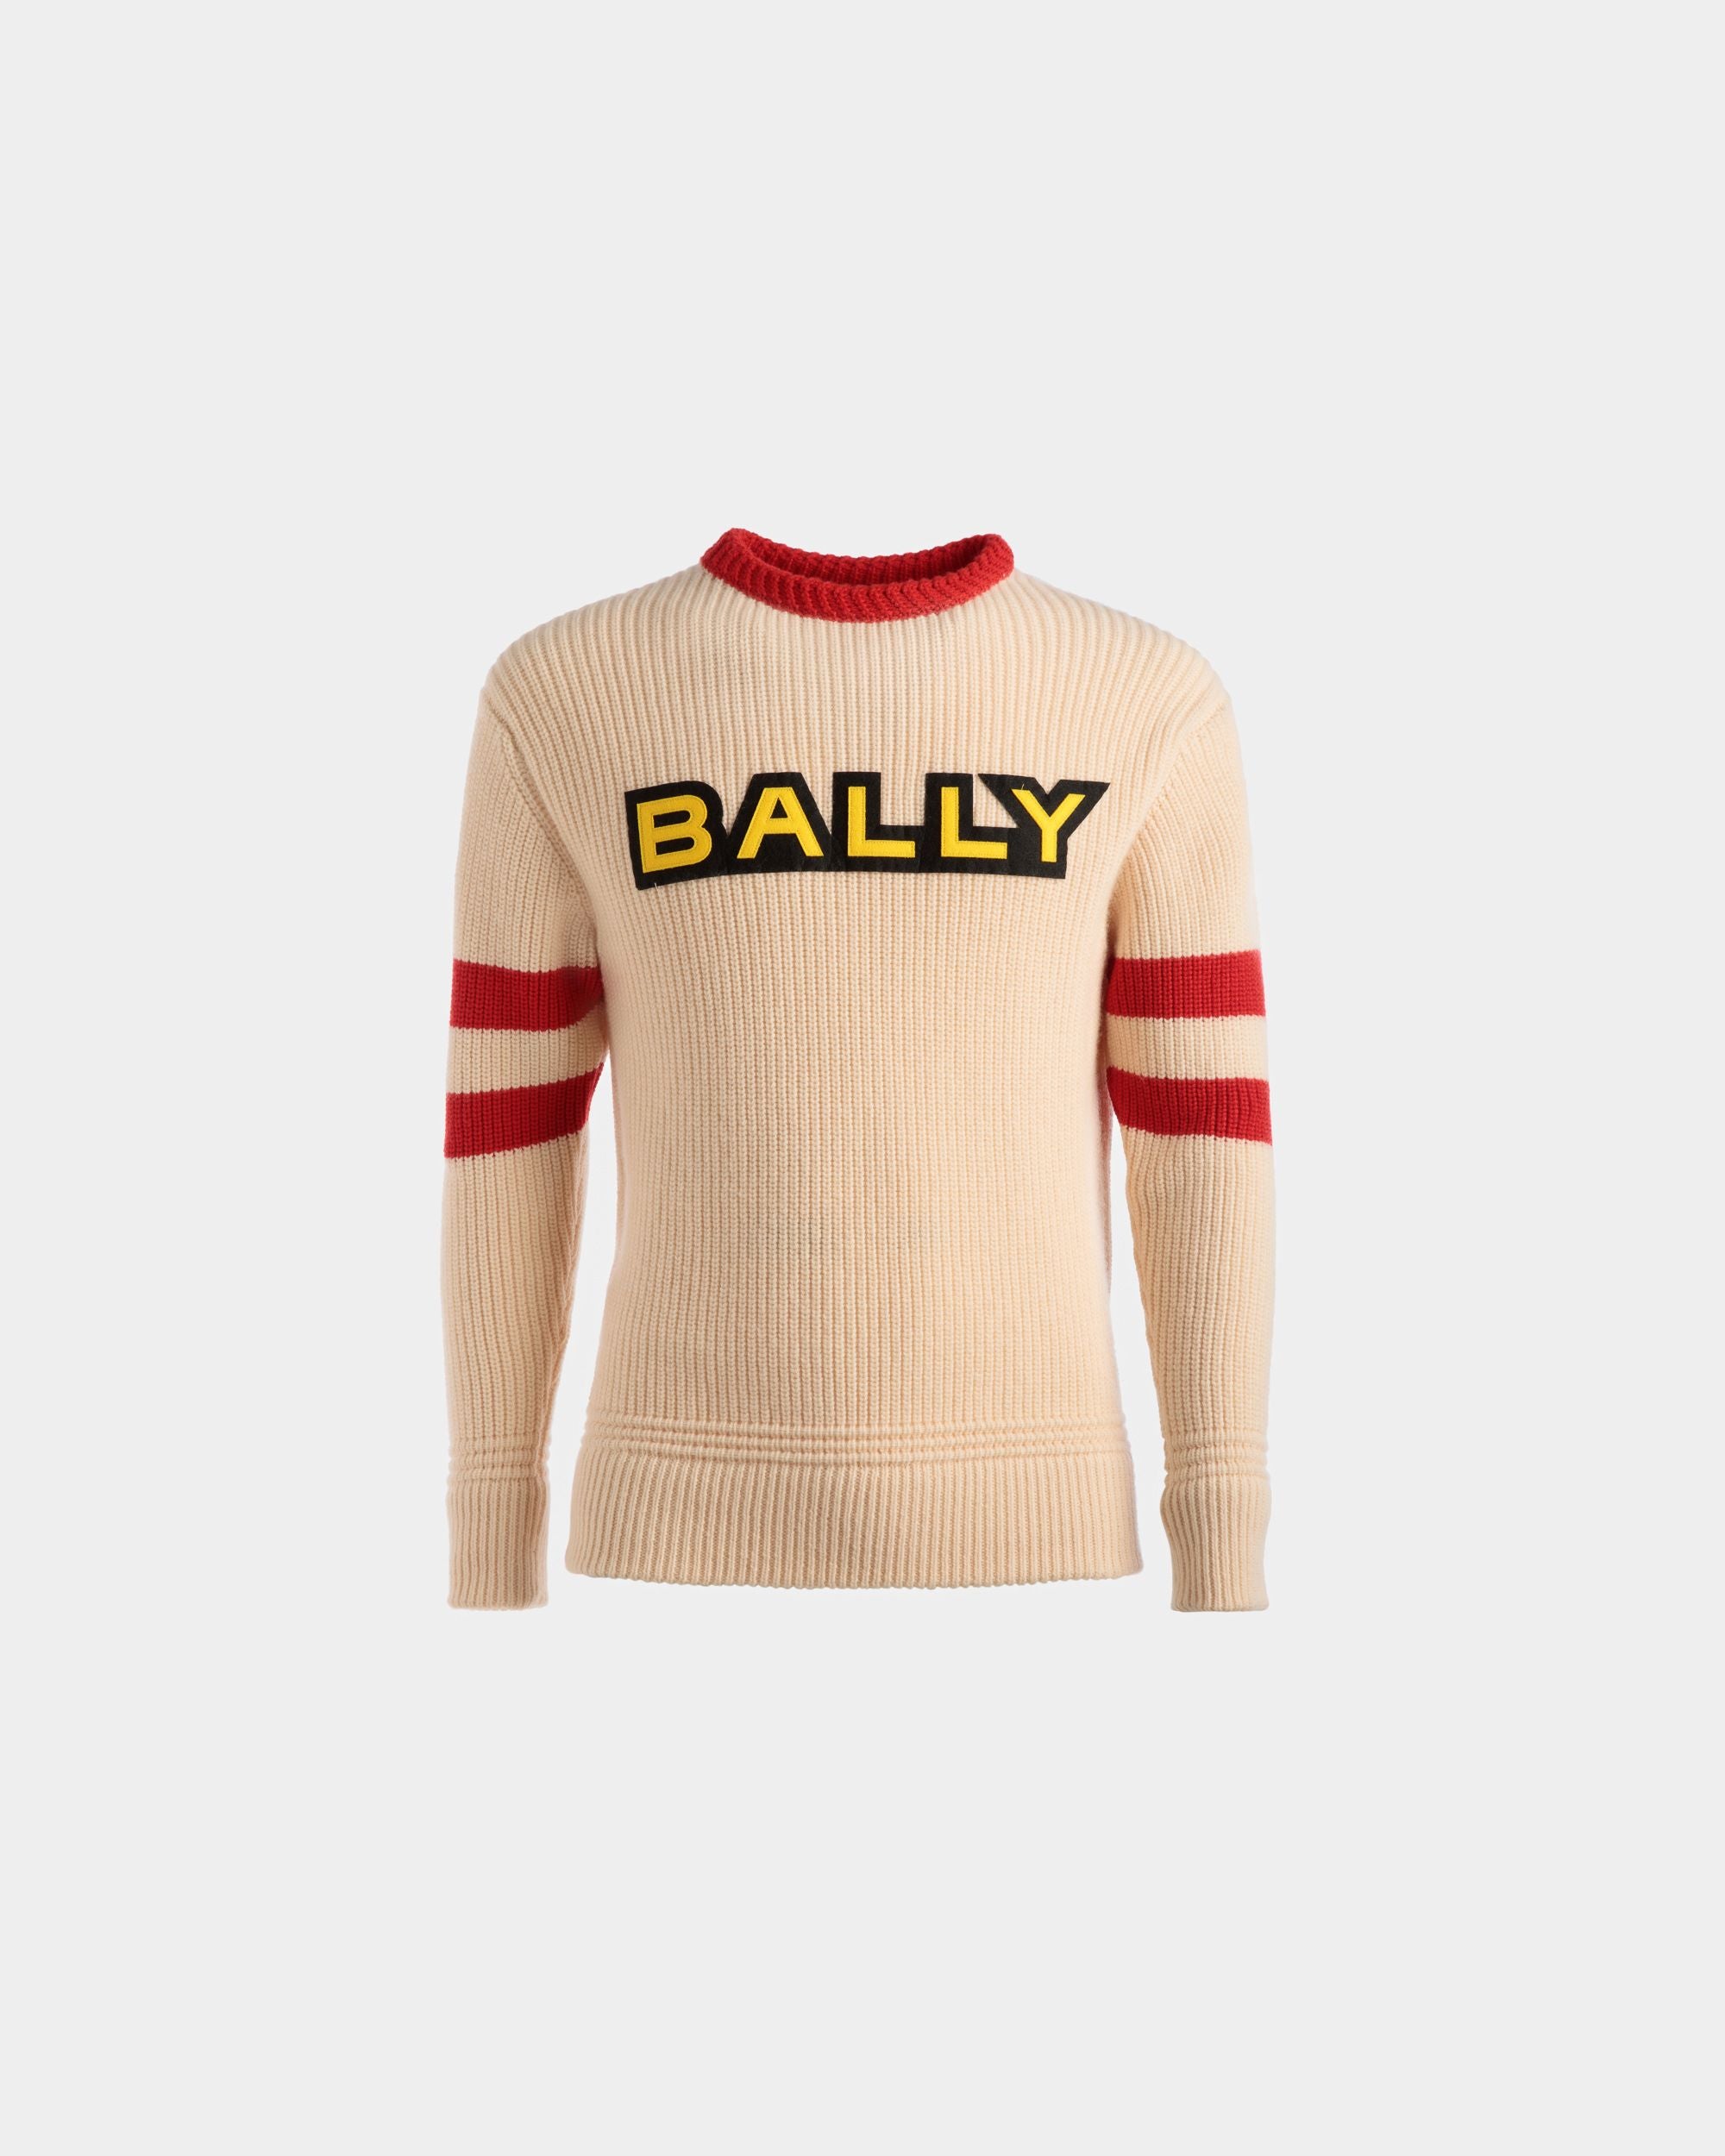 Crew Neck Sweater | Men's Crew Neck | Bone And Red Wool | Bally | Still Life Front